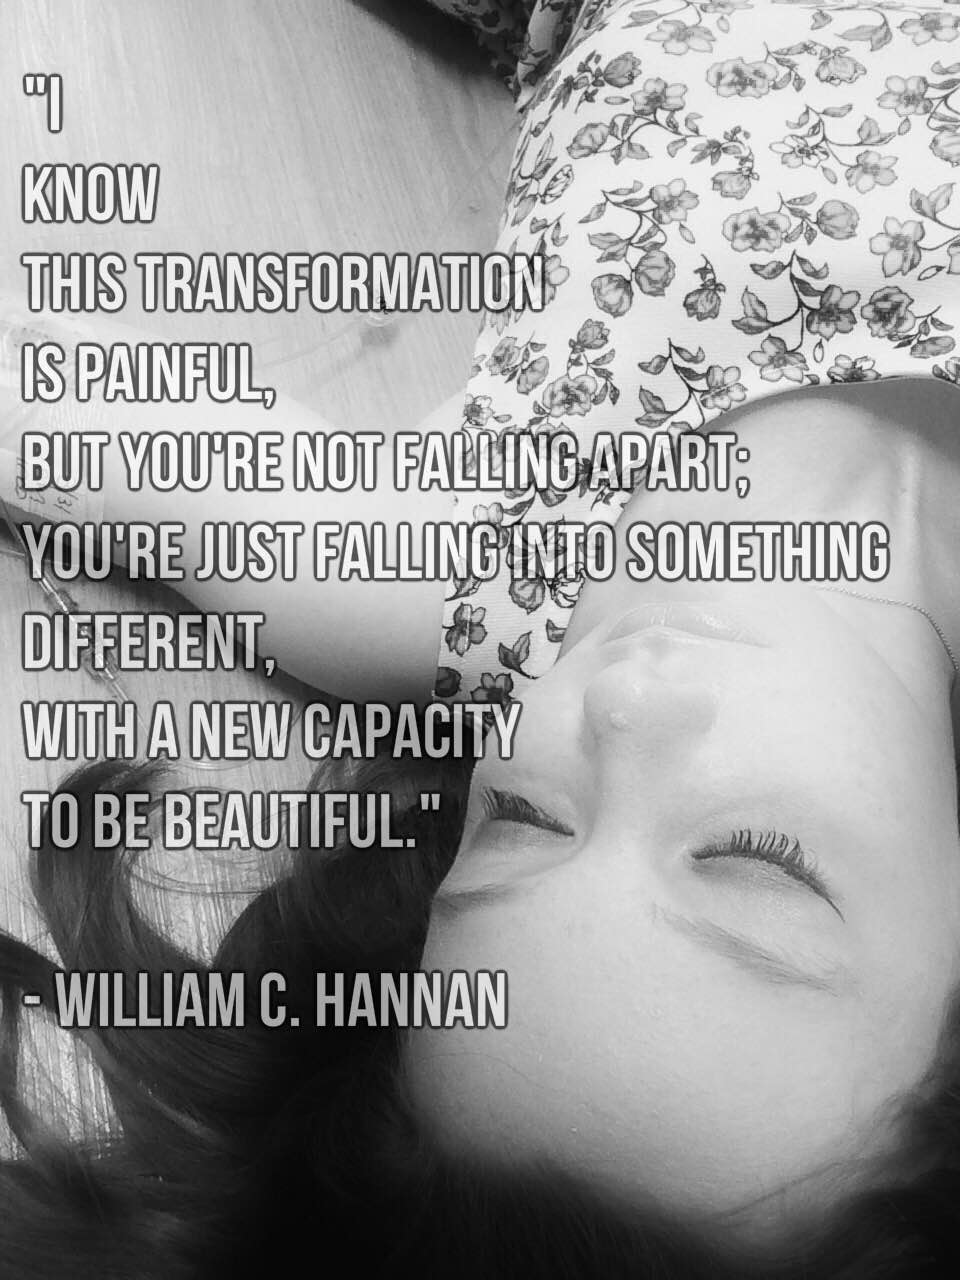 meme with words i know this transformation is painful but you're not falling apart; you're just falling into something different, with a new capacity to be beautiful by william c. hannan